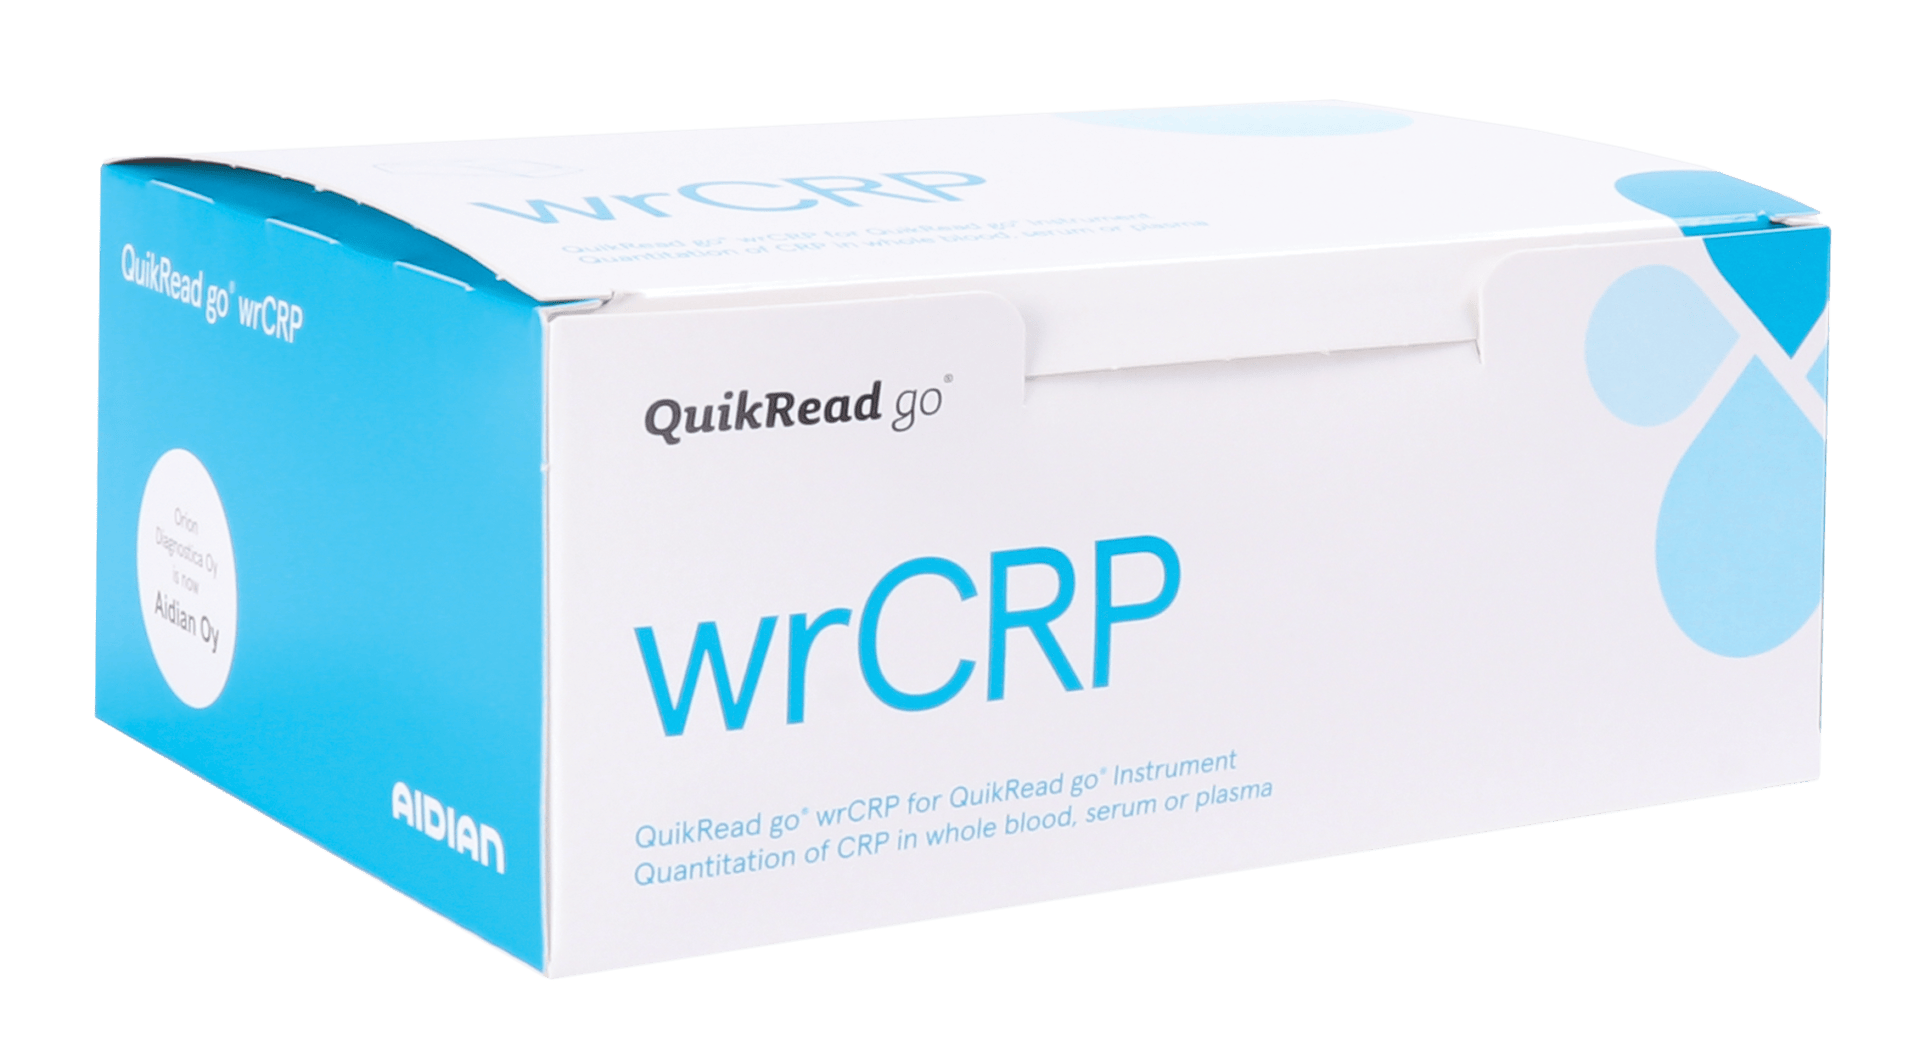 QuikRead go wrCRP tests